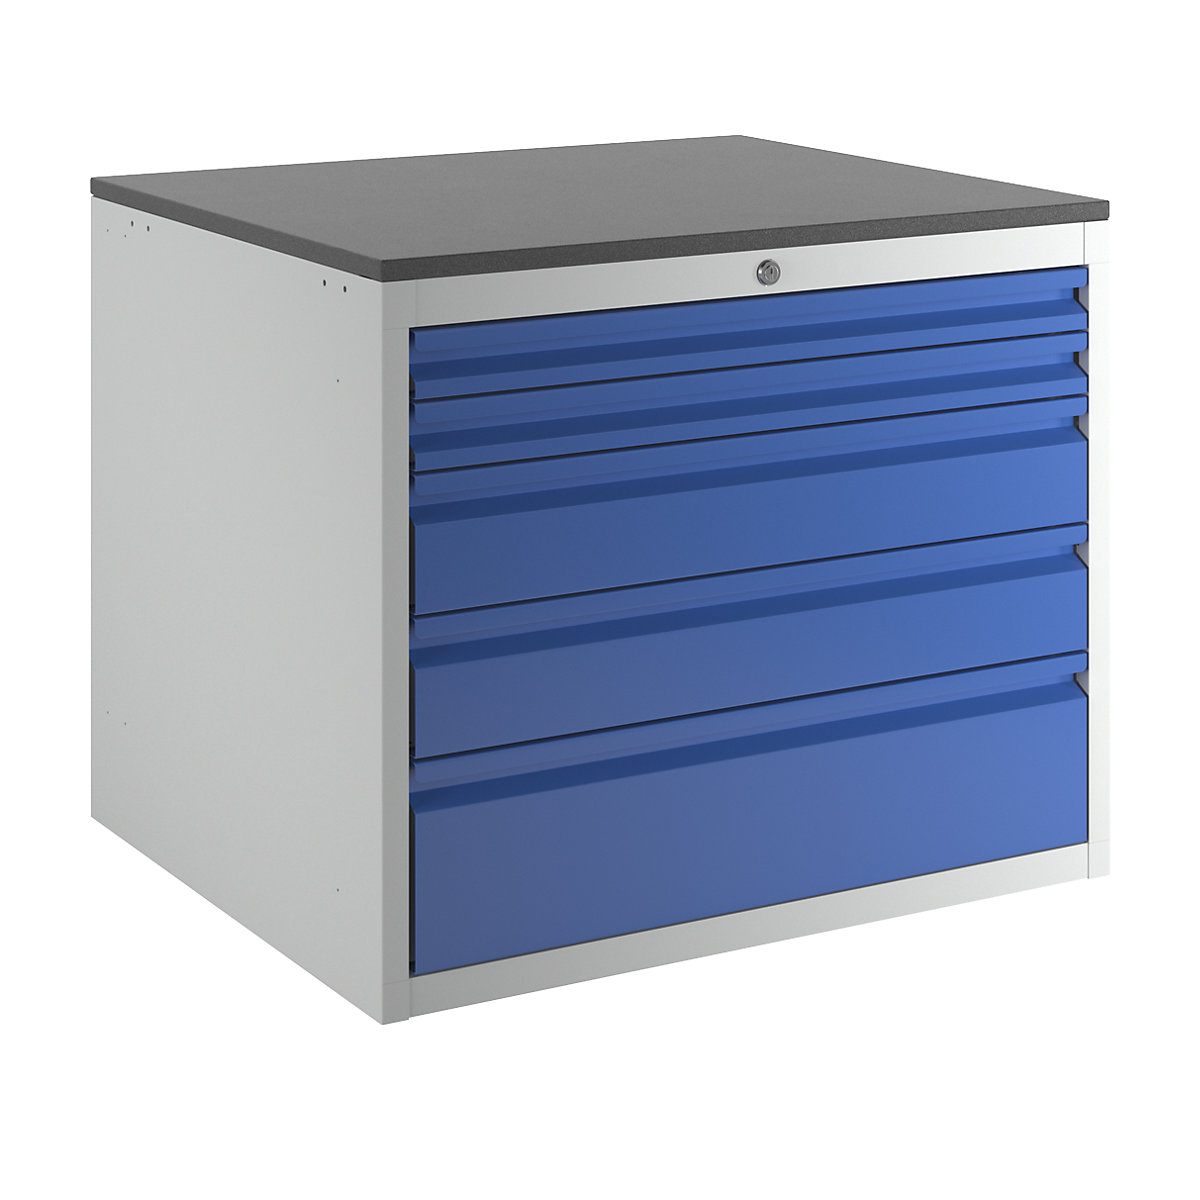 Drawer cupboard with telescopic guides – RAU, height 640 mm, drawers: 2 x 60, 2 x 120, 1 x 180 mm, light grey / gentian blue, width 770 mm-6